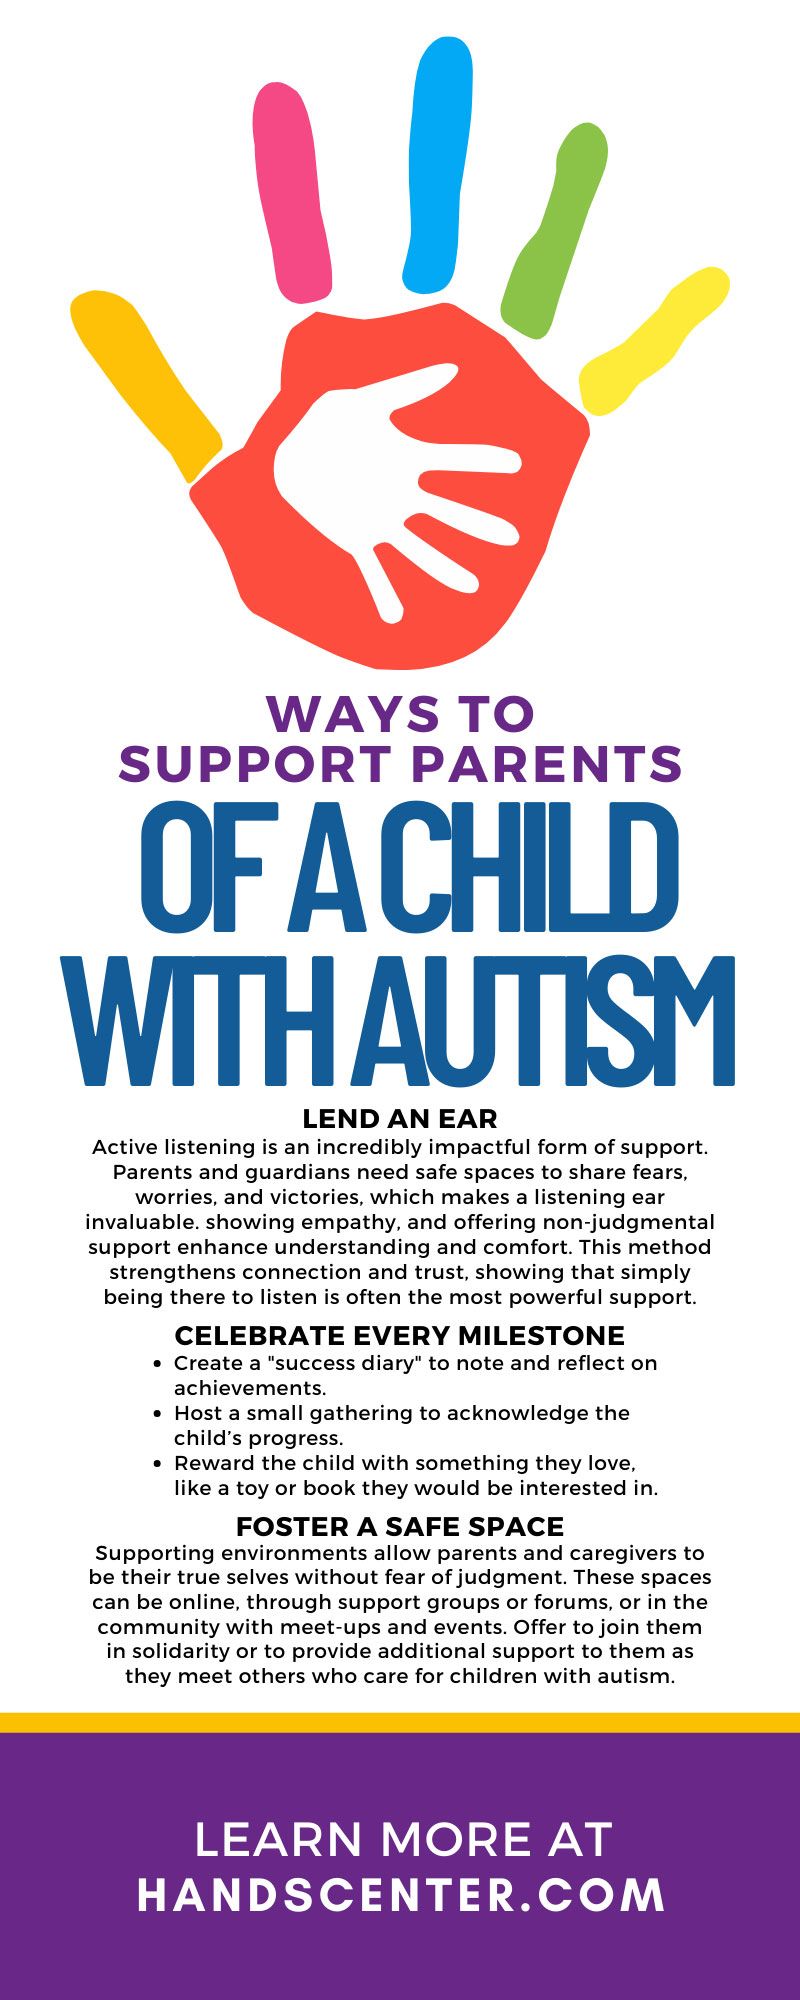 Ways To Support Parents of a Child With Autism